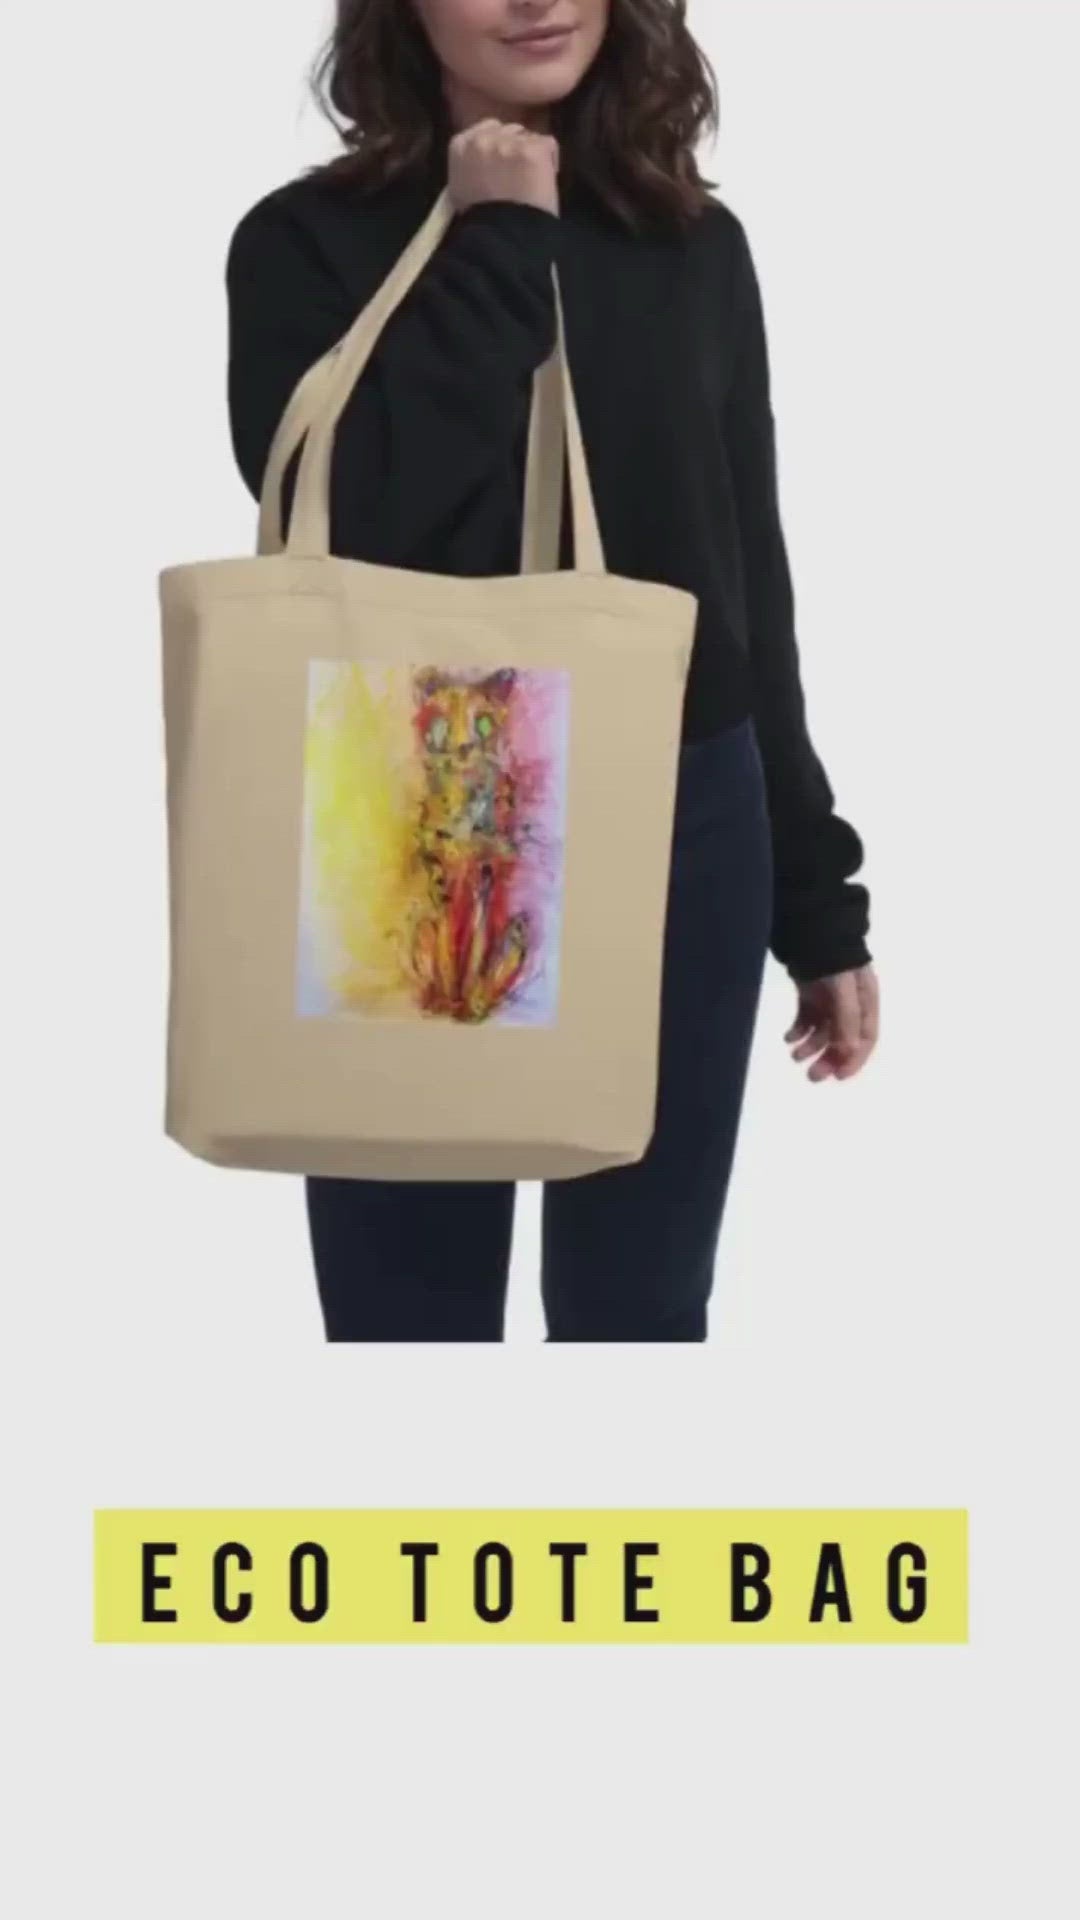 Oatmeal tote bag 100% certified organic cotton with exclusive artwork "The Long Wait" print 